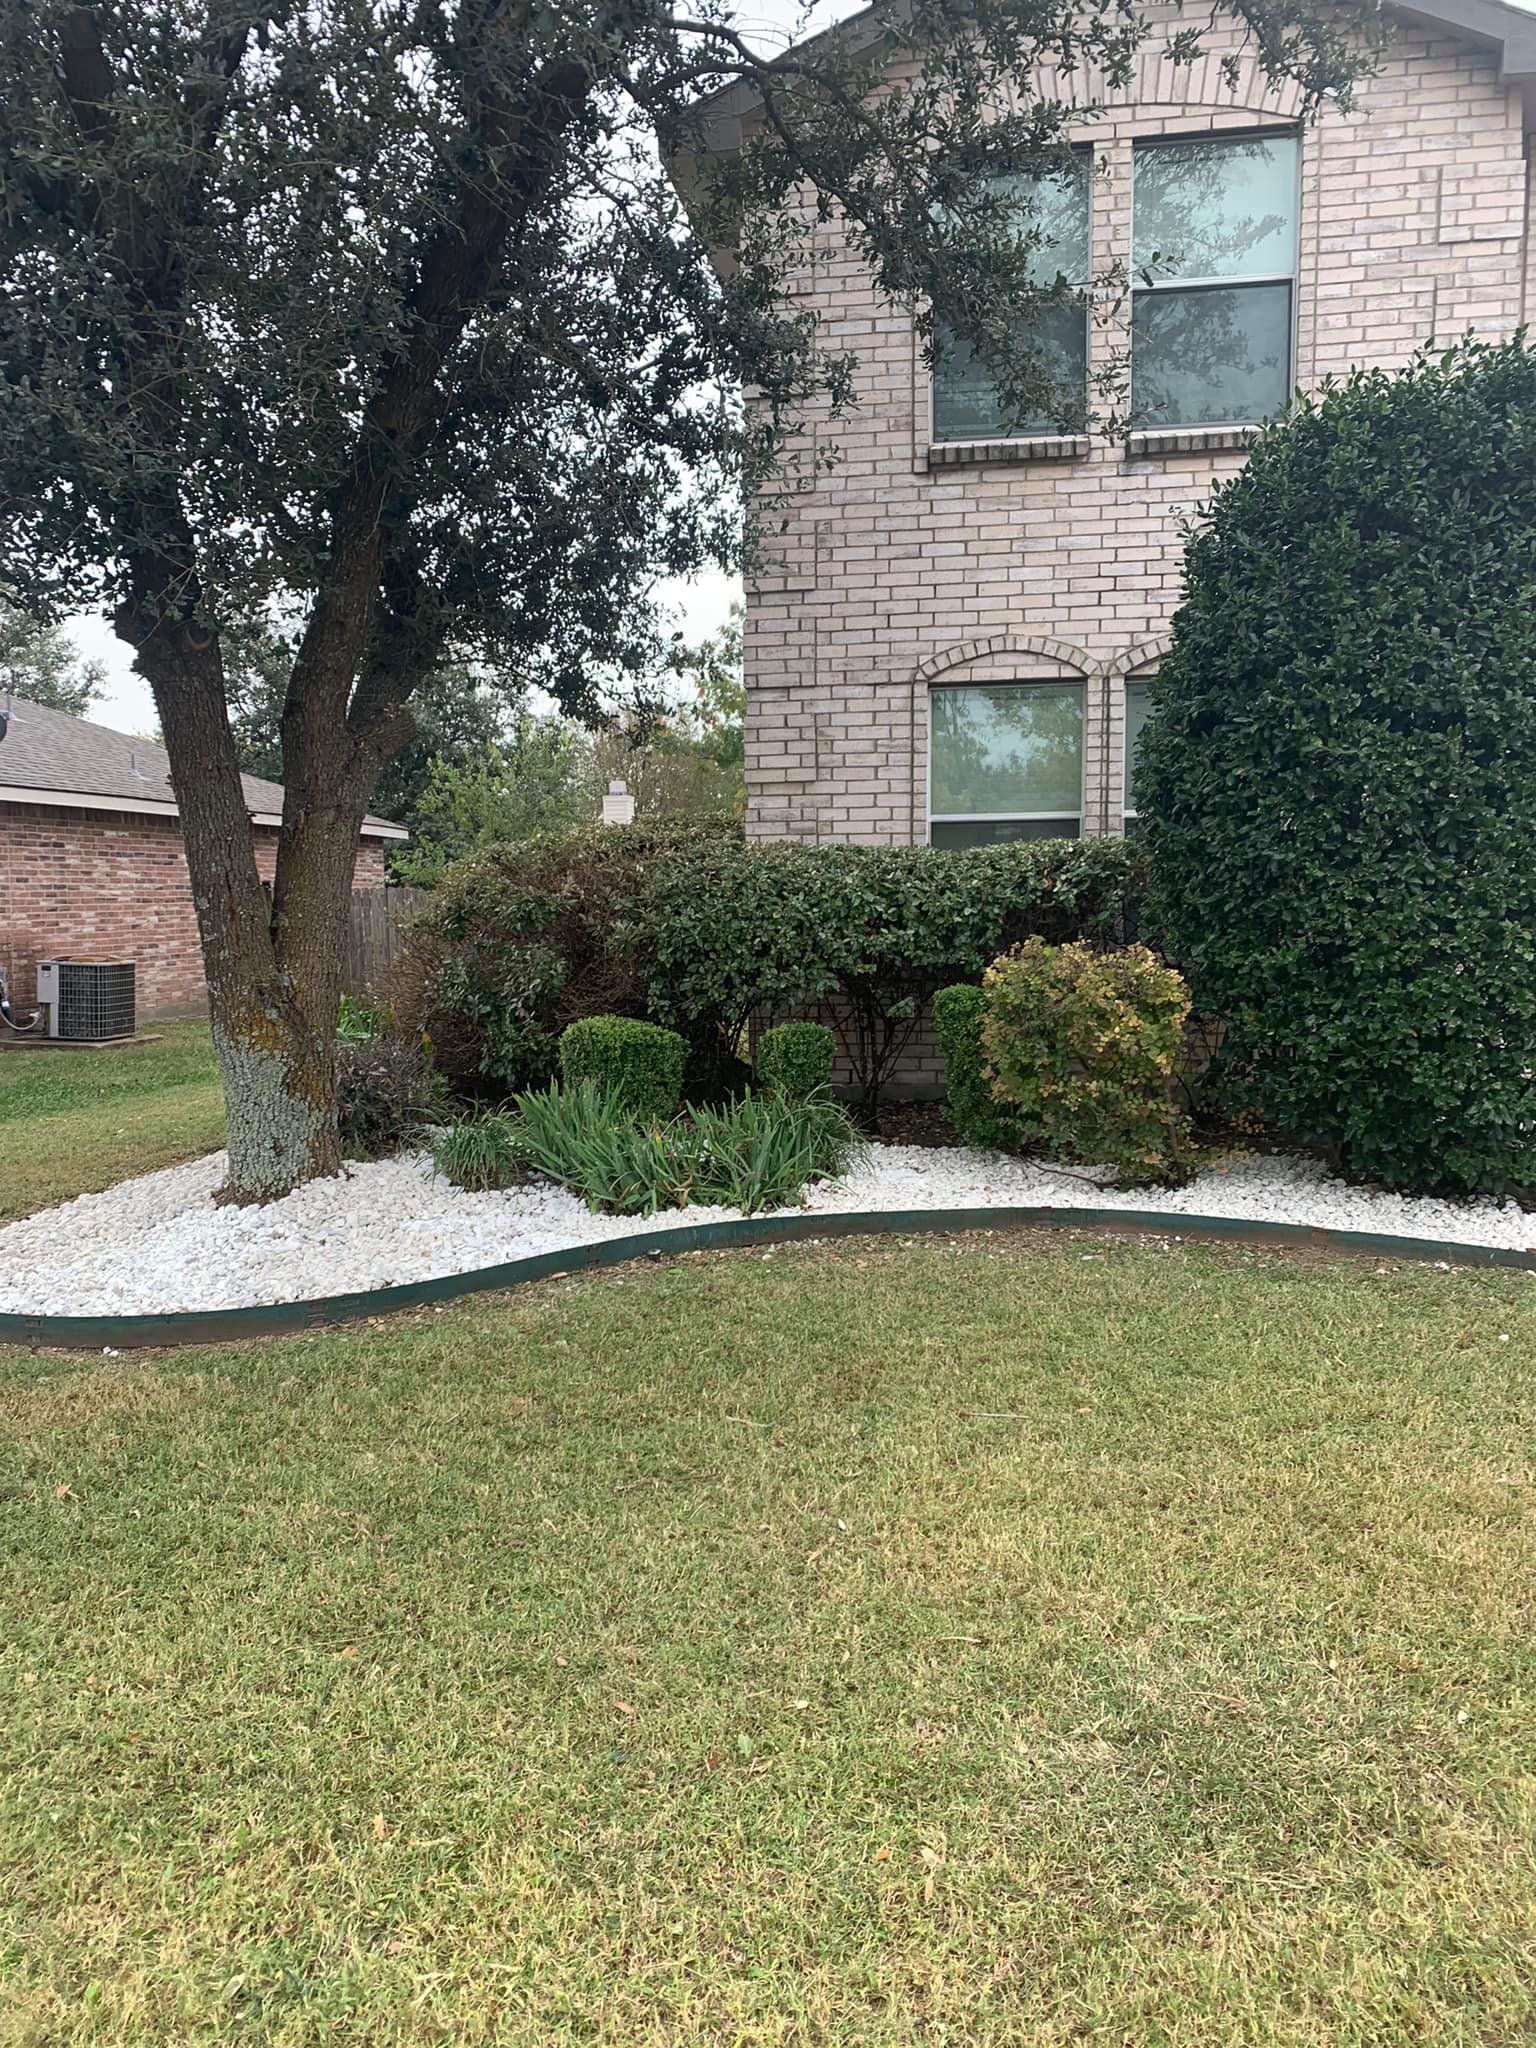 All Photos for Grass Kickers Lawn Care and Landscaping in Dallas, TX